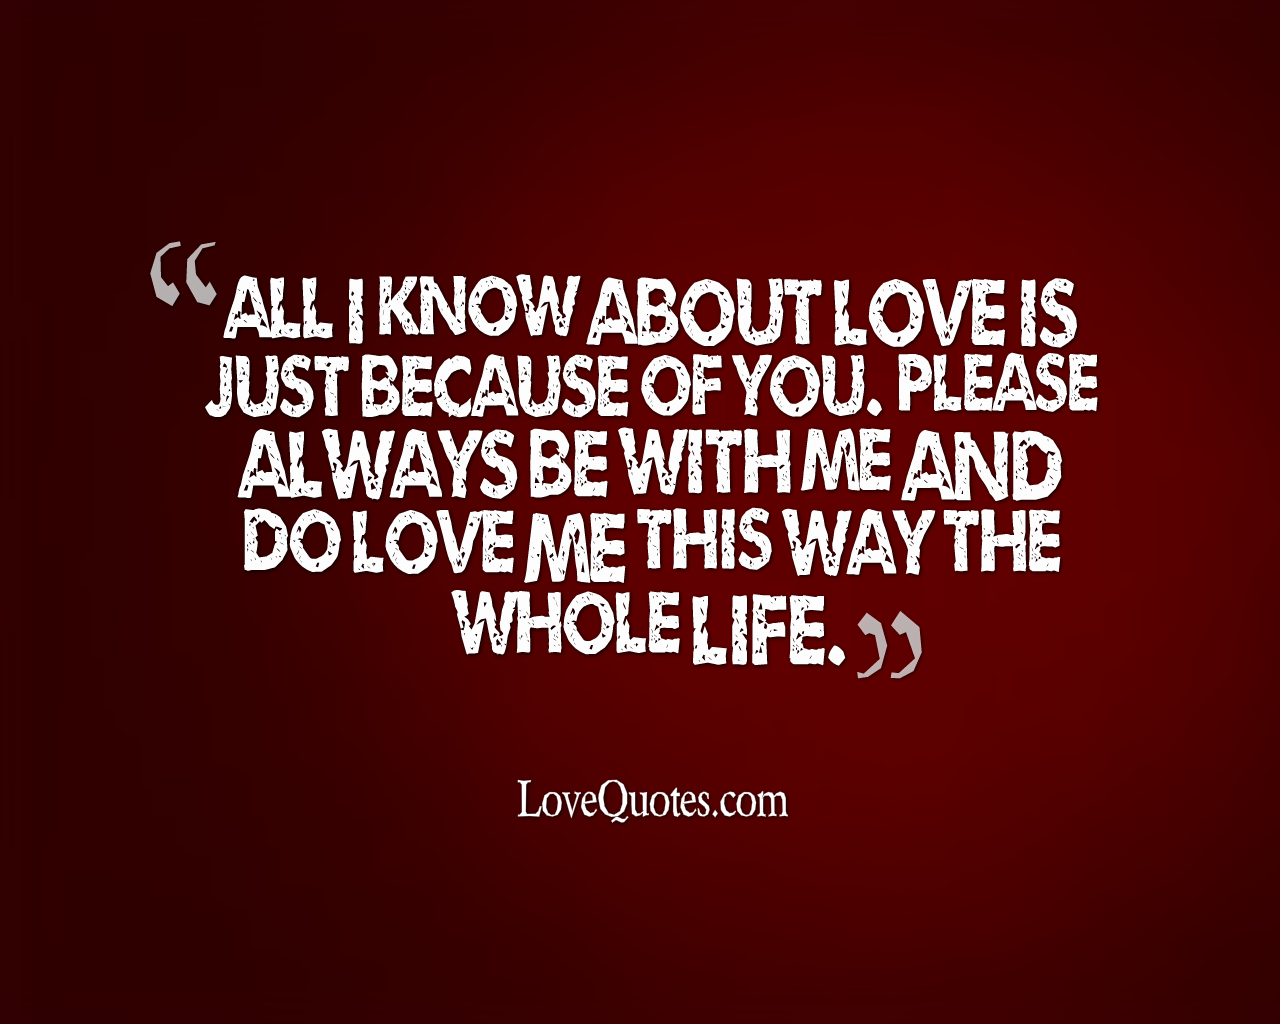 Love Me This Way - Love Quotes